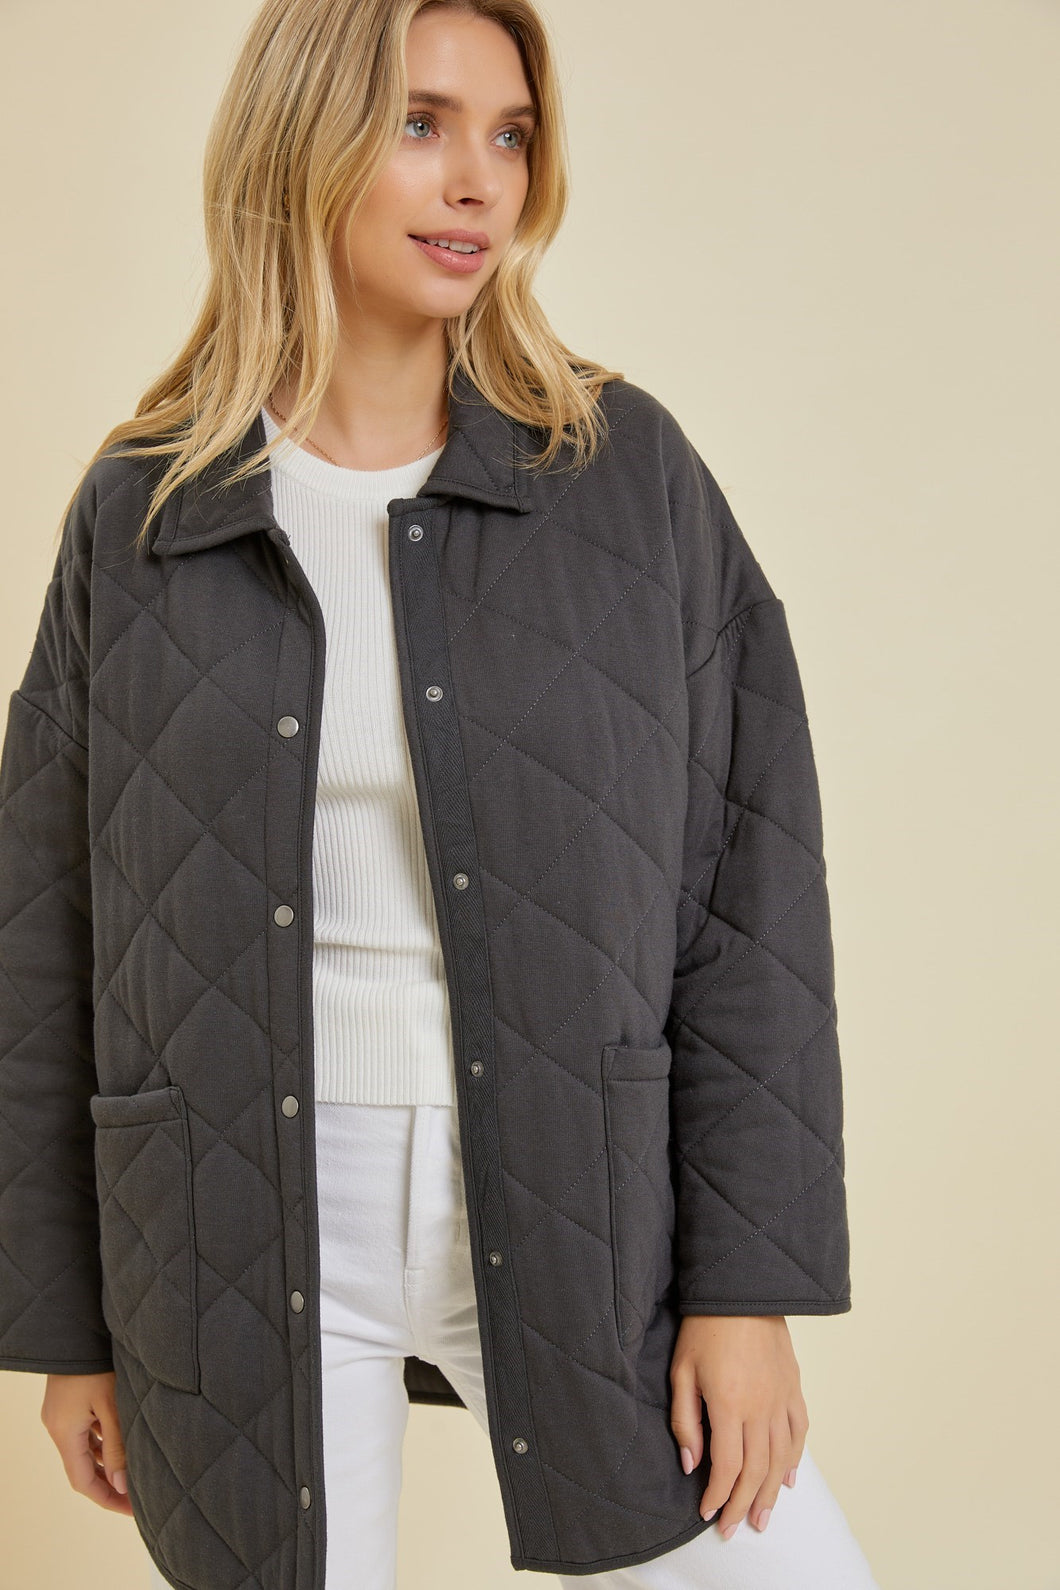 OVERSIZED GRAY QUILTED JACKET